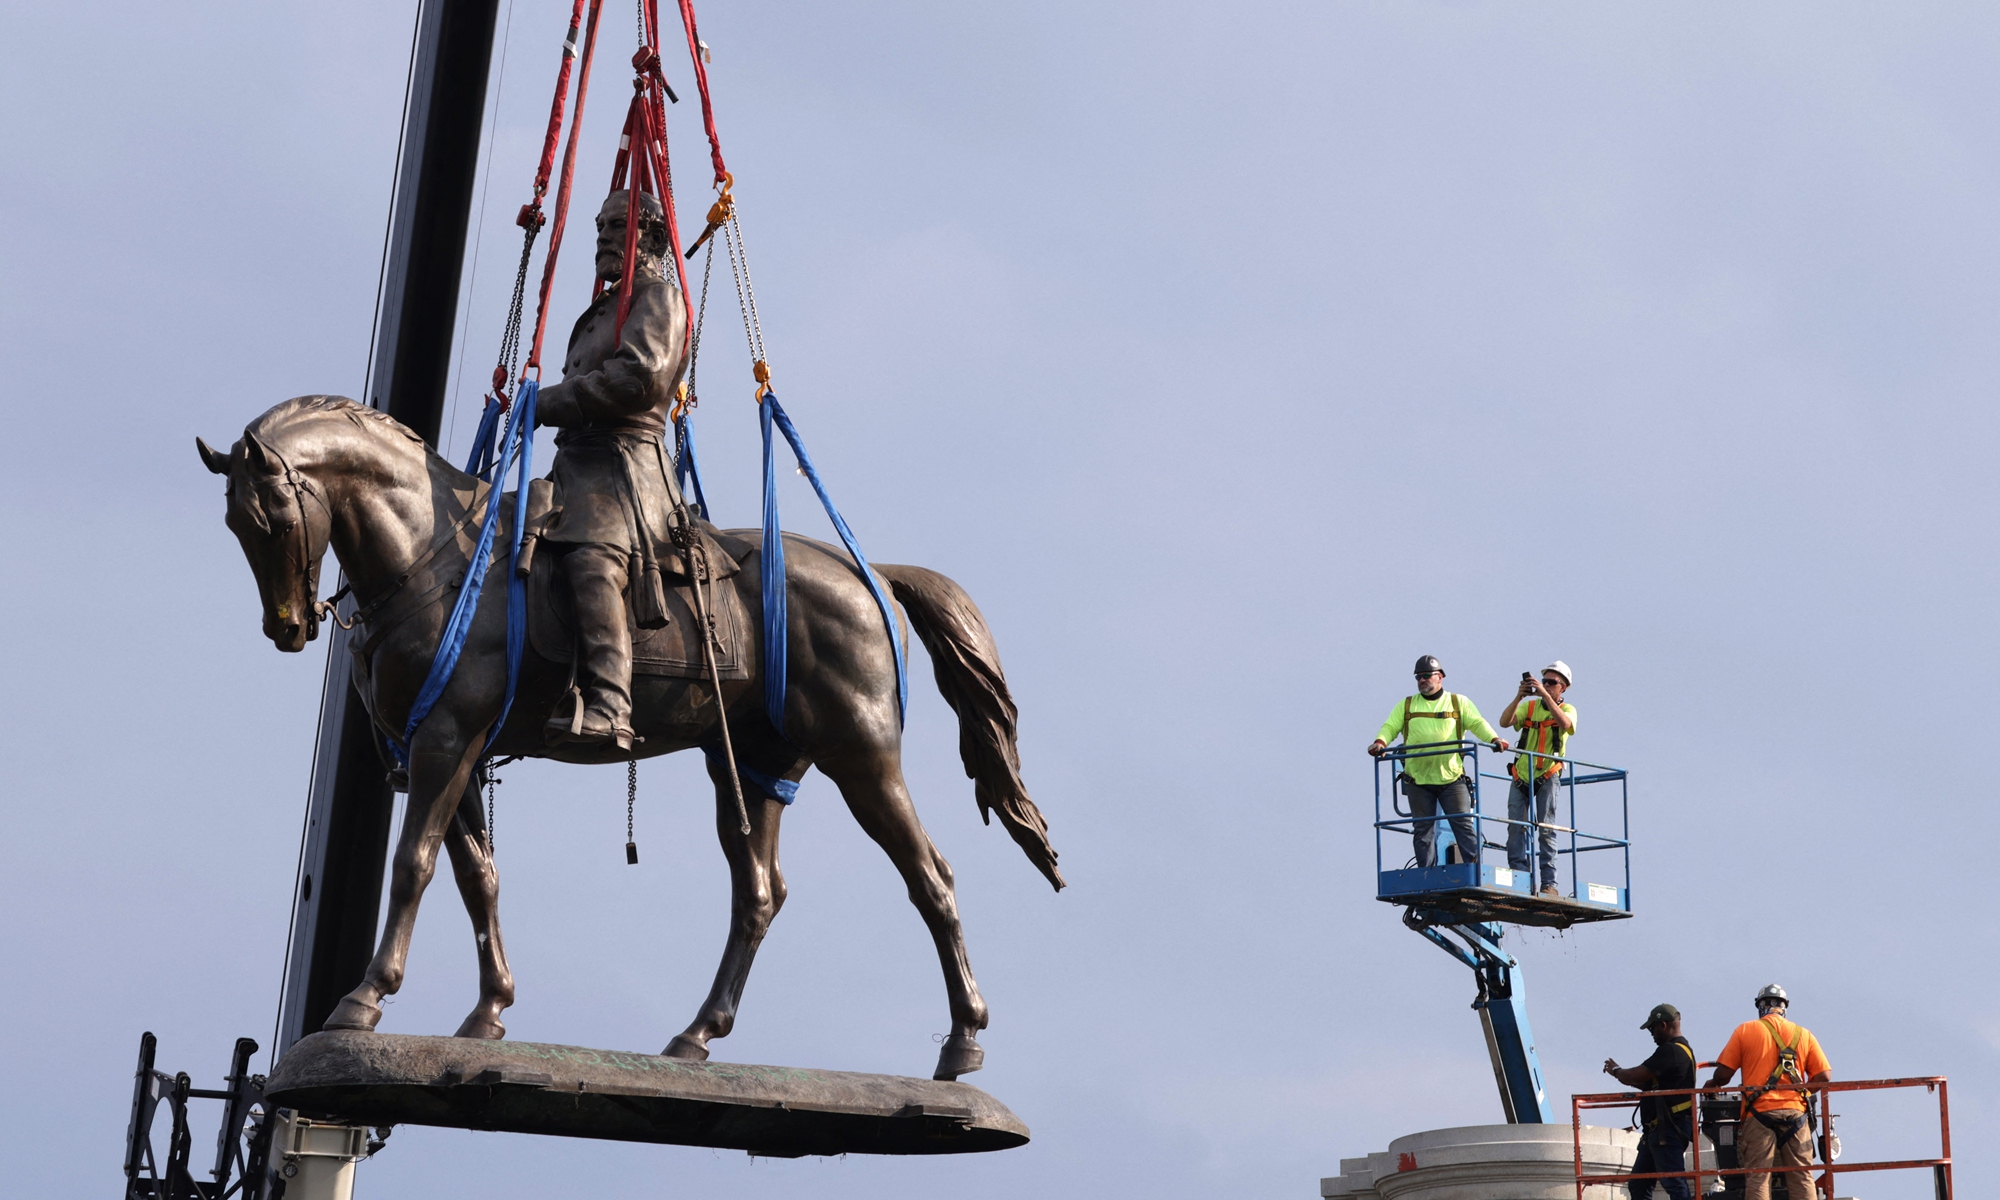 The statue of Robert E. Lee is lowered from its pedestal at Robert E. Lee Memorial during its removal  in Richmond, Virginia. The Commonwealth of Virginia removed the largest Confederate statue remaining in the US following authorization by all three branches of state government, including a unanimous decision by the Virginia Supreme Court. Photo: AFP